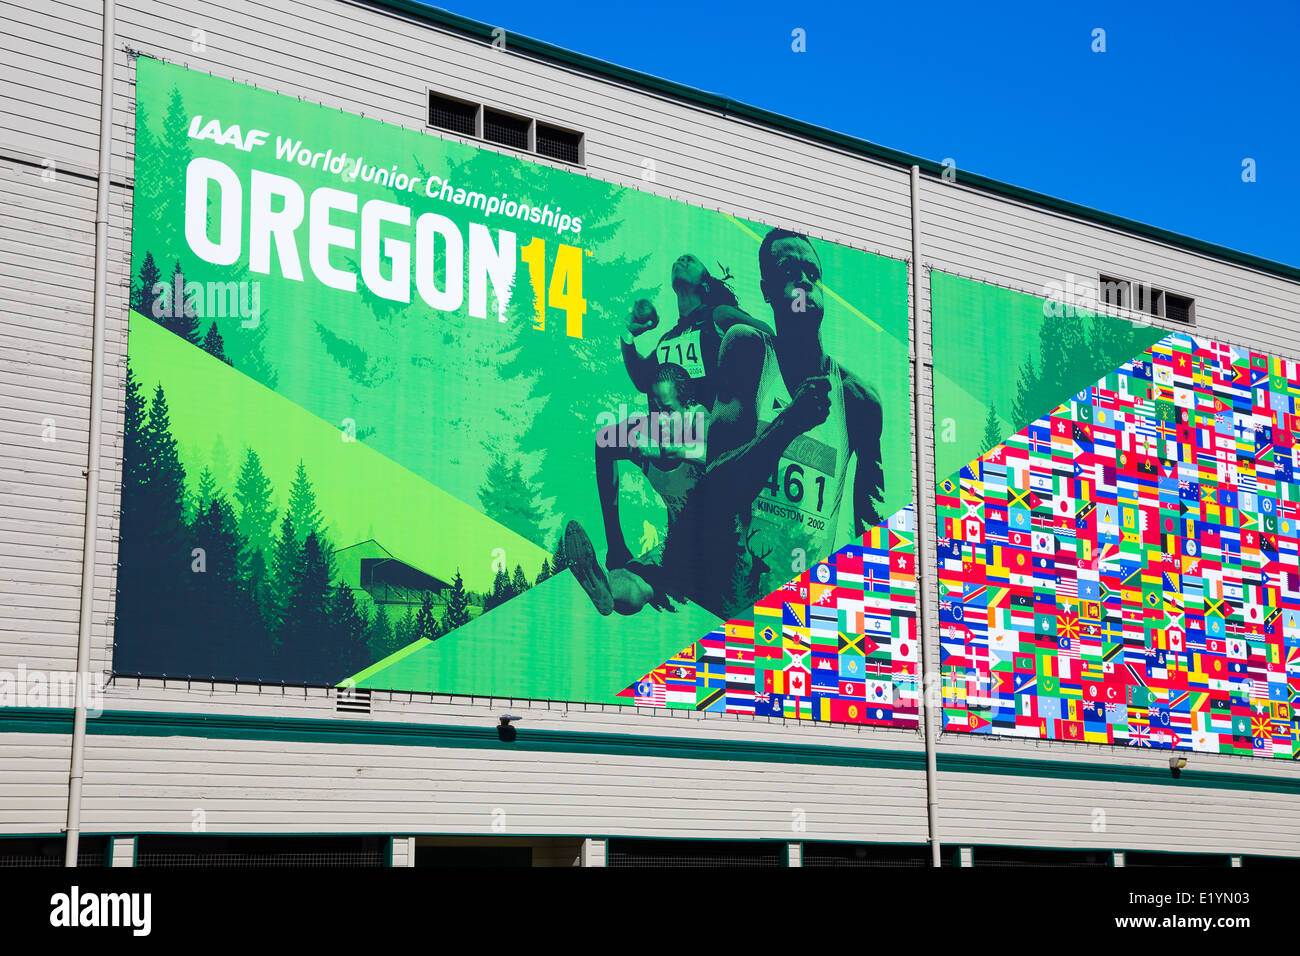 Eugene, OR, USA - June 5, 2014: 2014 IAAF World Junior Championships advertisement located on the grandstand at Hayward Field. Stock Photo